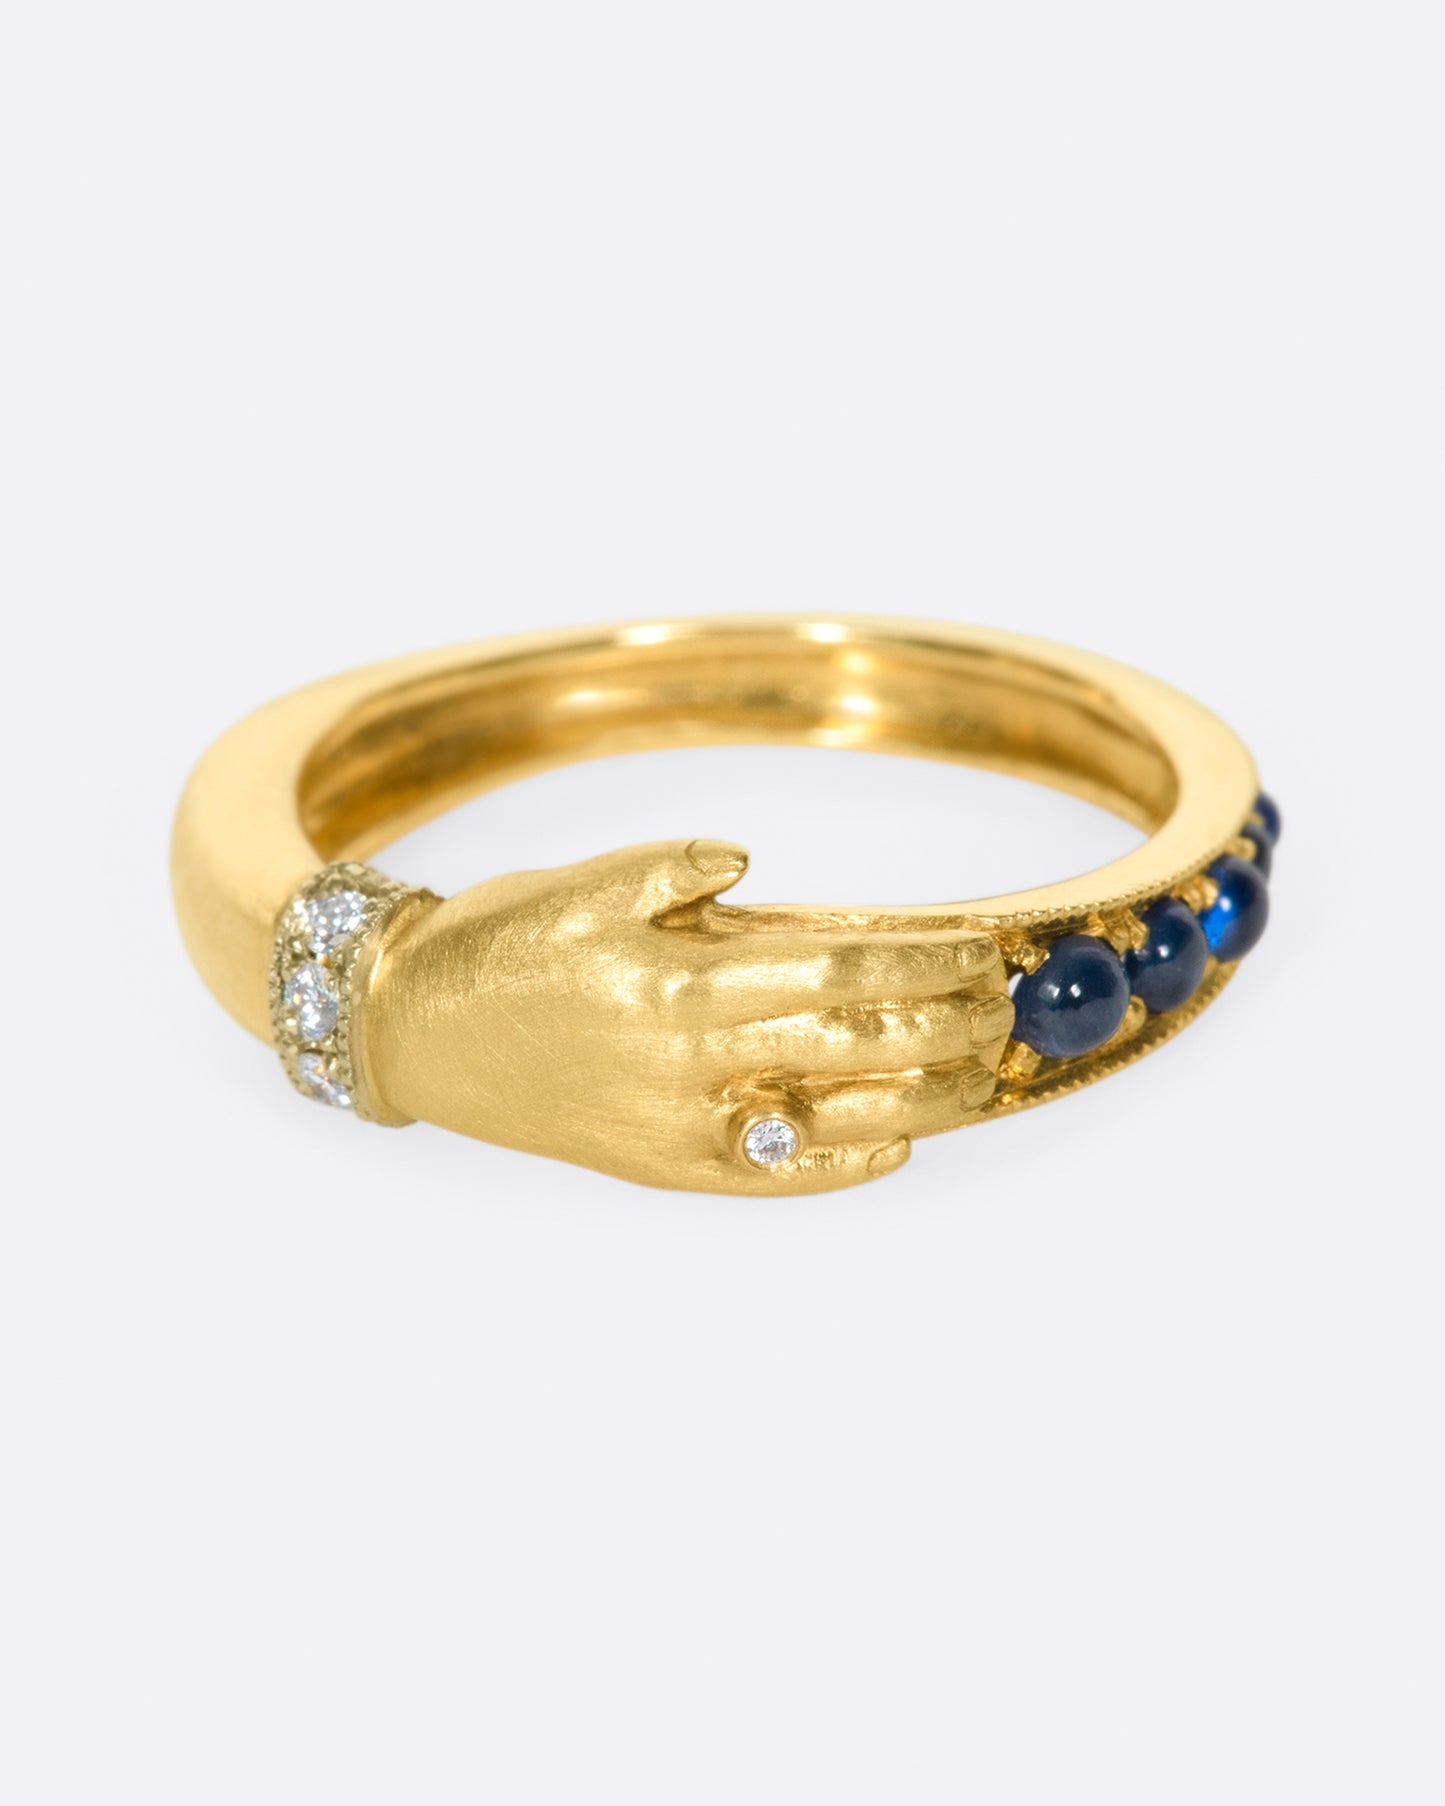 The design of this ring is driven by a combination of Anthony Lent's fascinations with ancient jewelry and the world of the miniature.